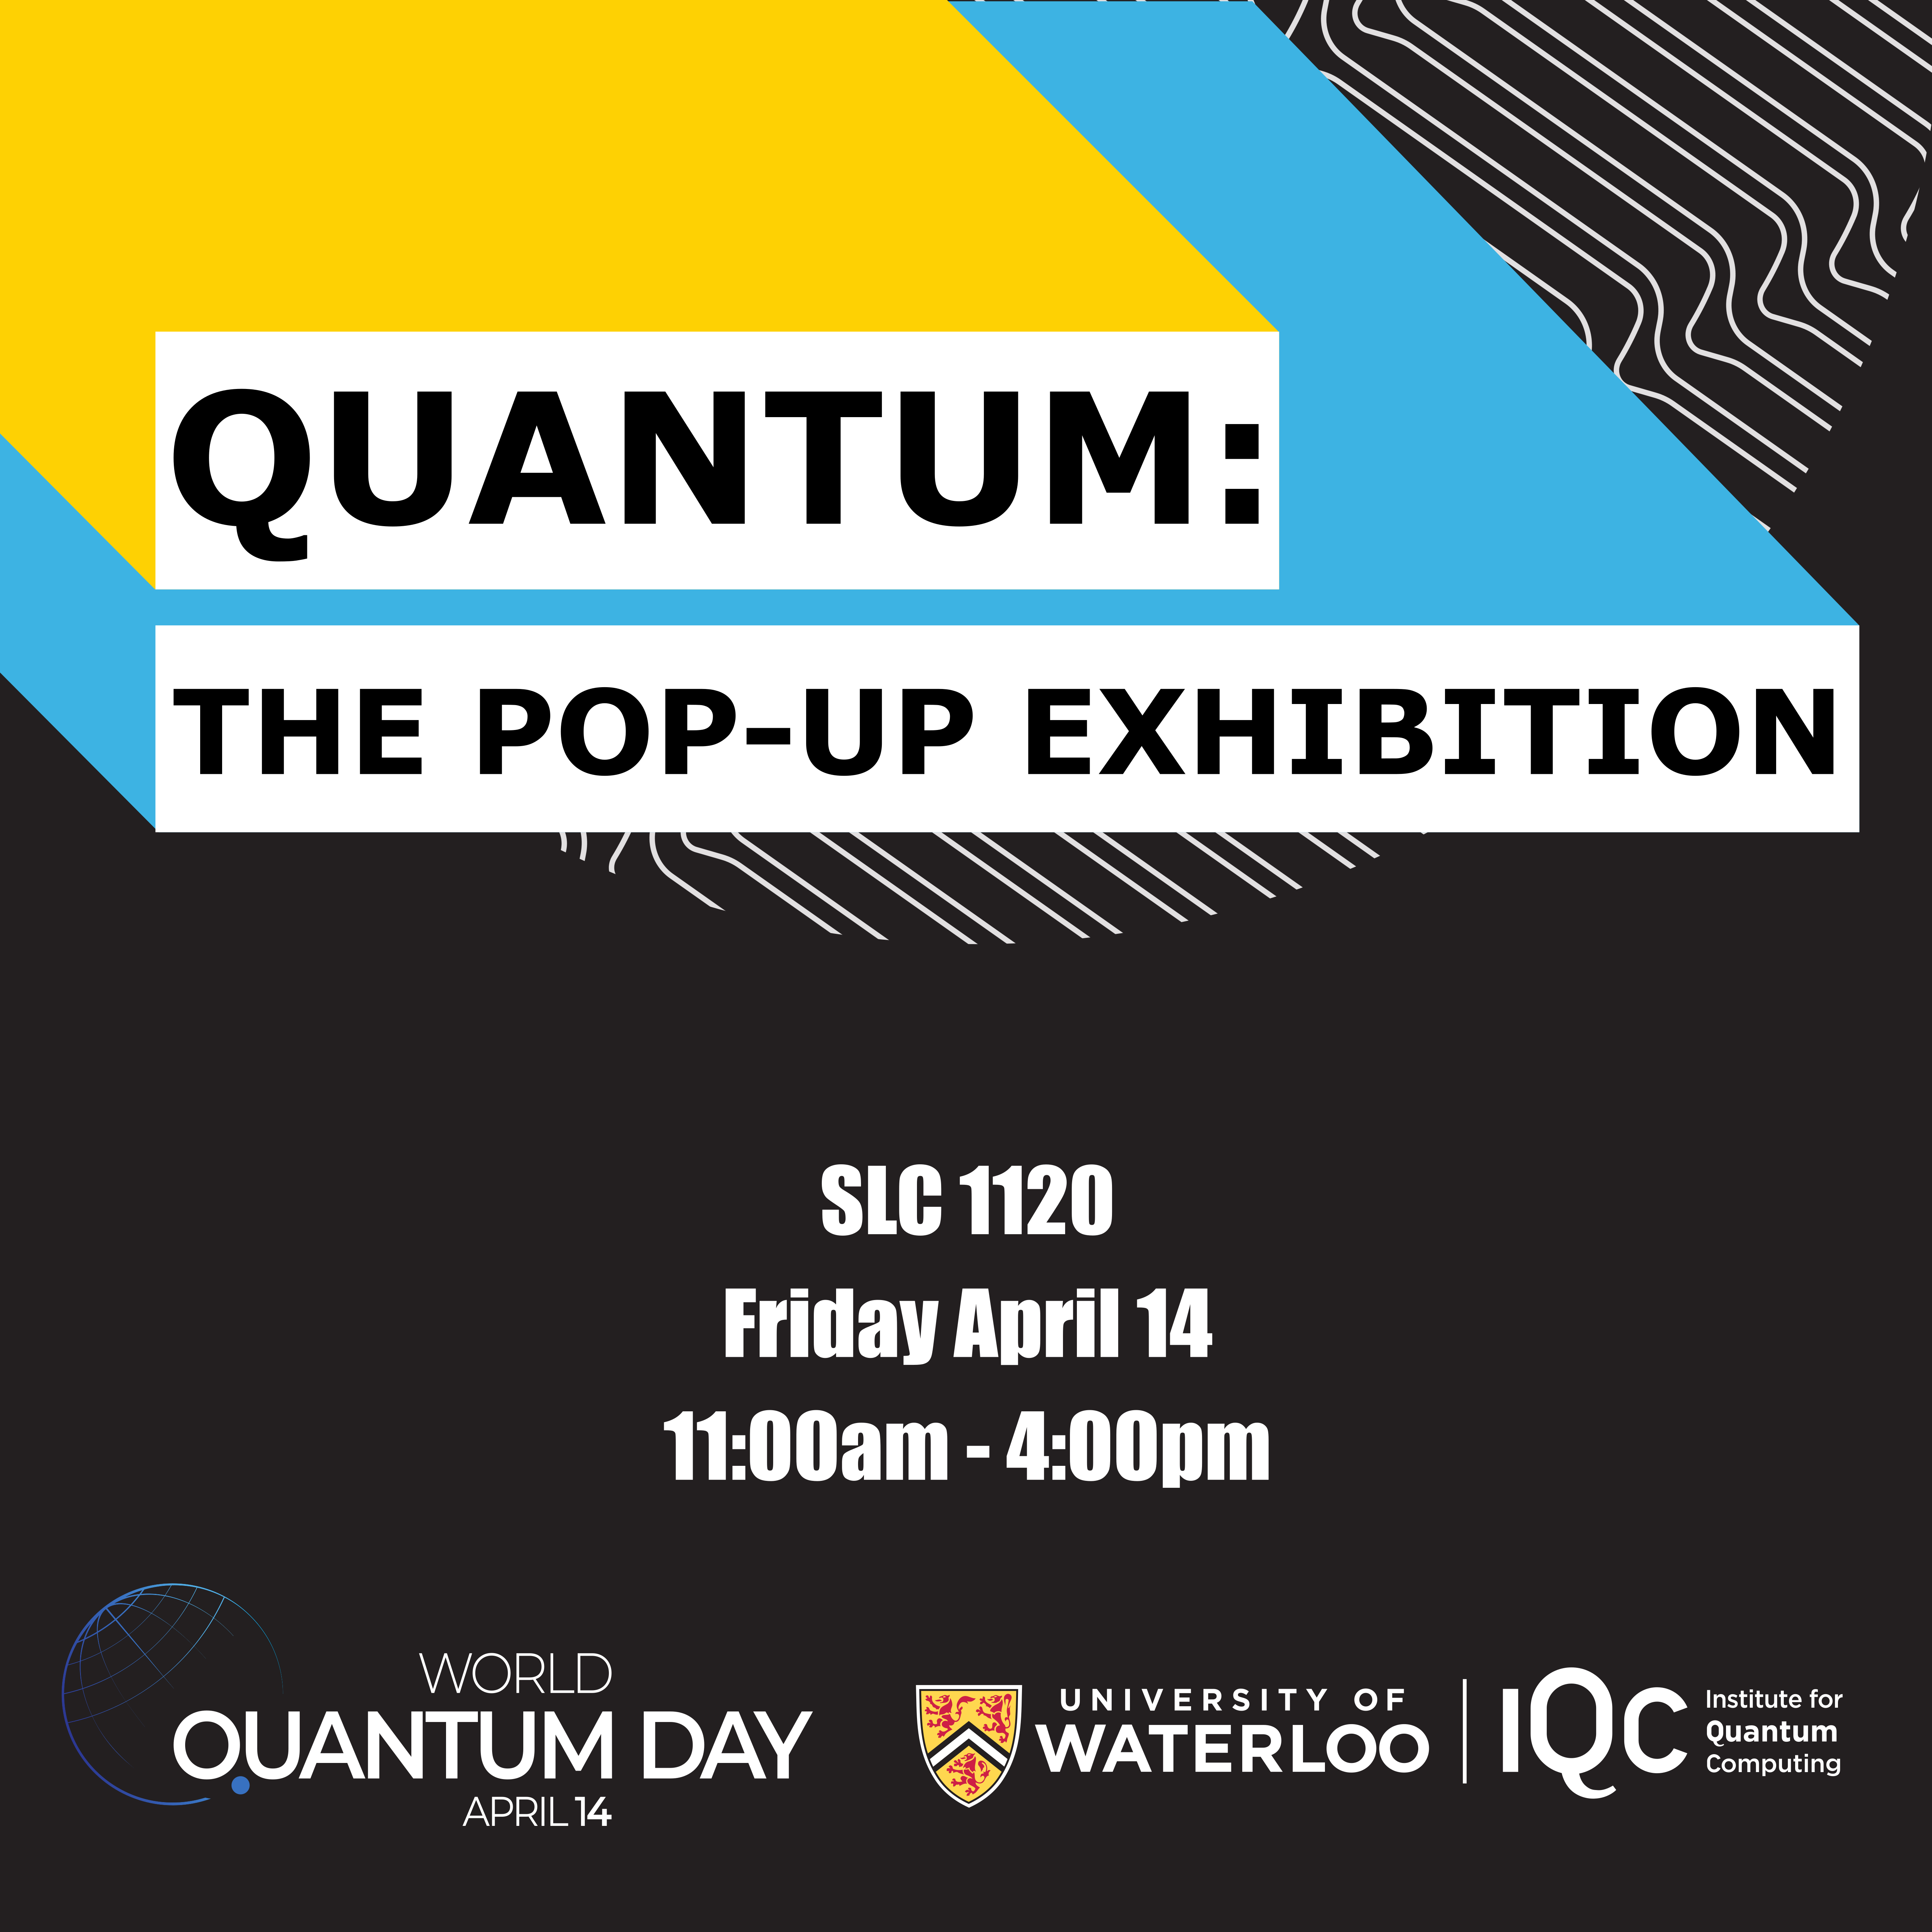 Quantum: The Pop-Up Exhibition will be in SLC 1120 on April 14th from 11am-4pm for World Quantum Day